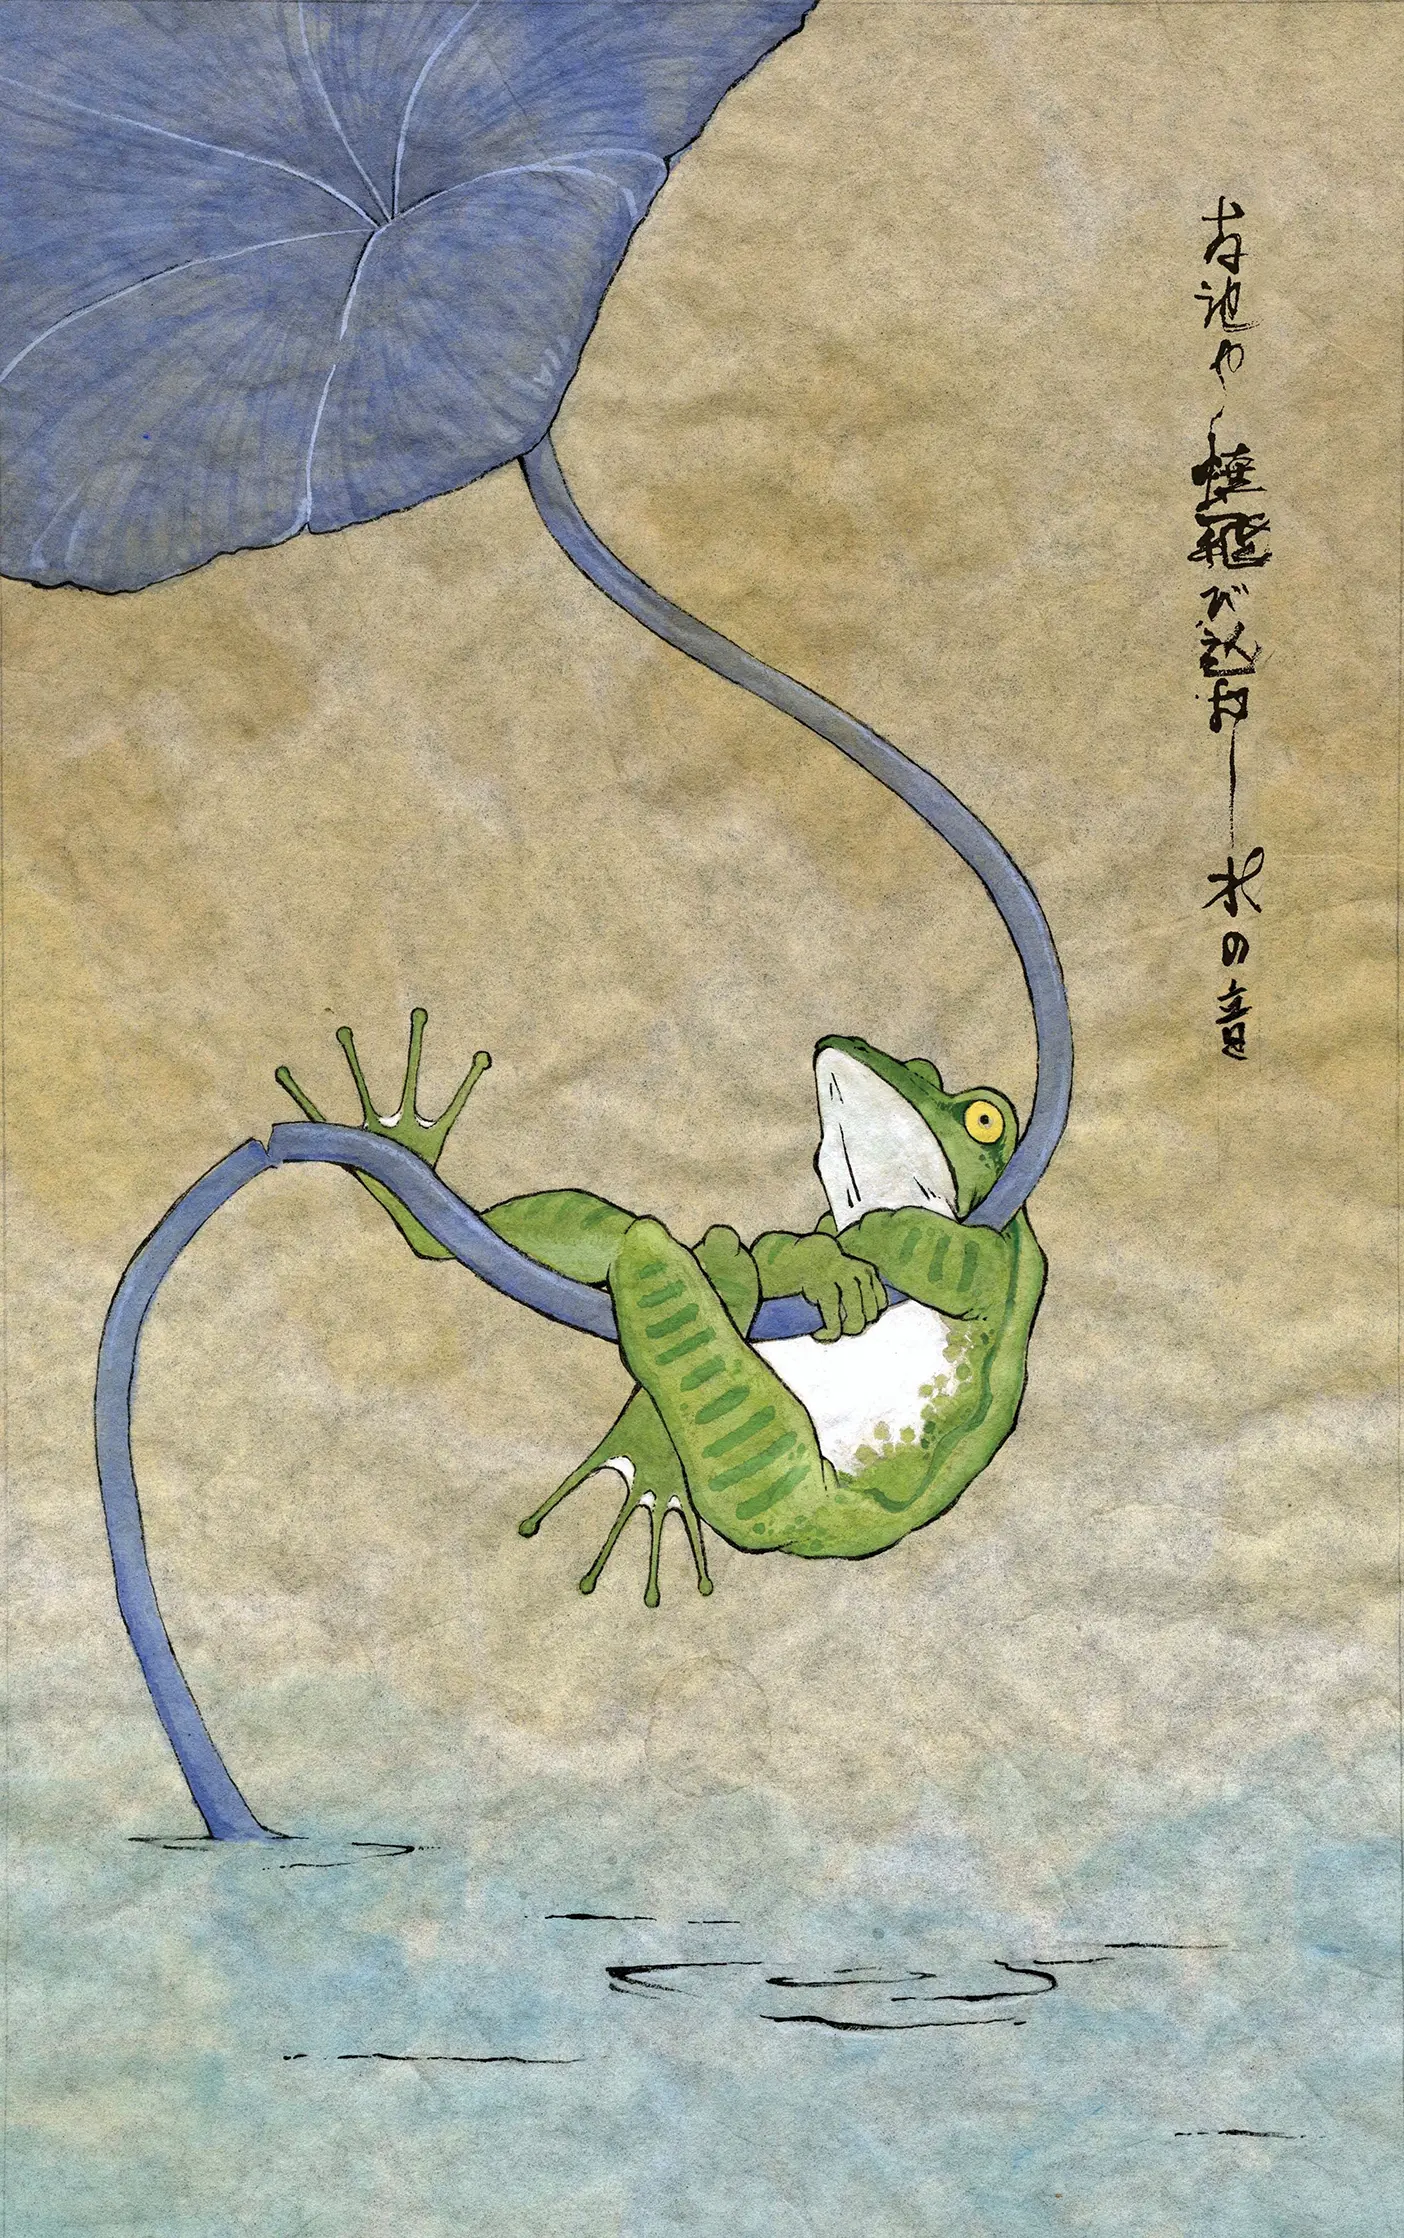 An illustration shows a frog clinging to a lily pad to try to stay out of the water. It has a traditional Japanese feel.